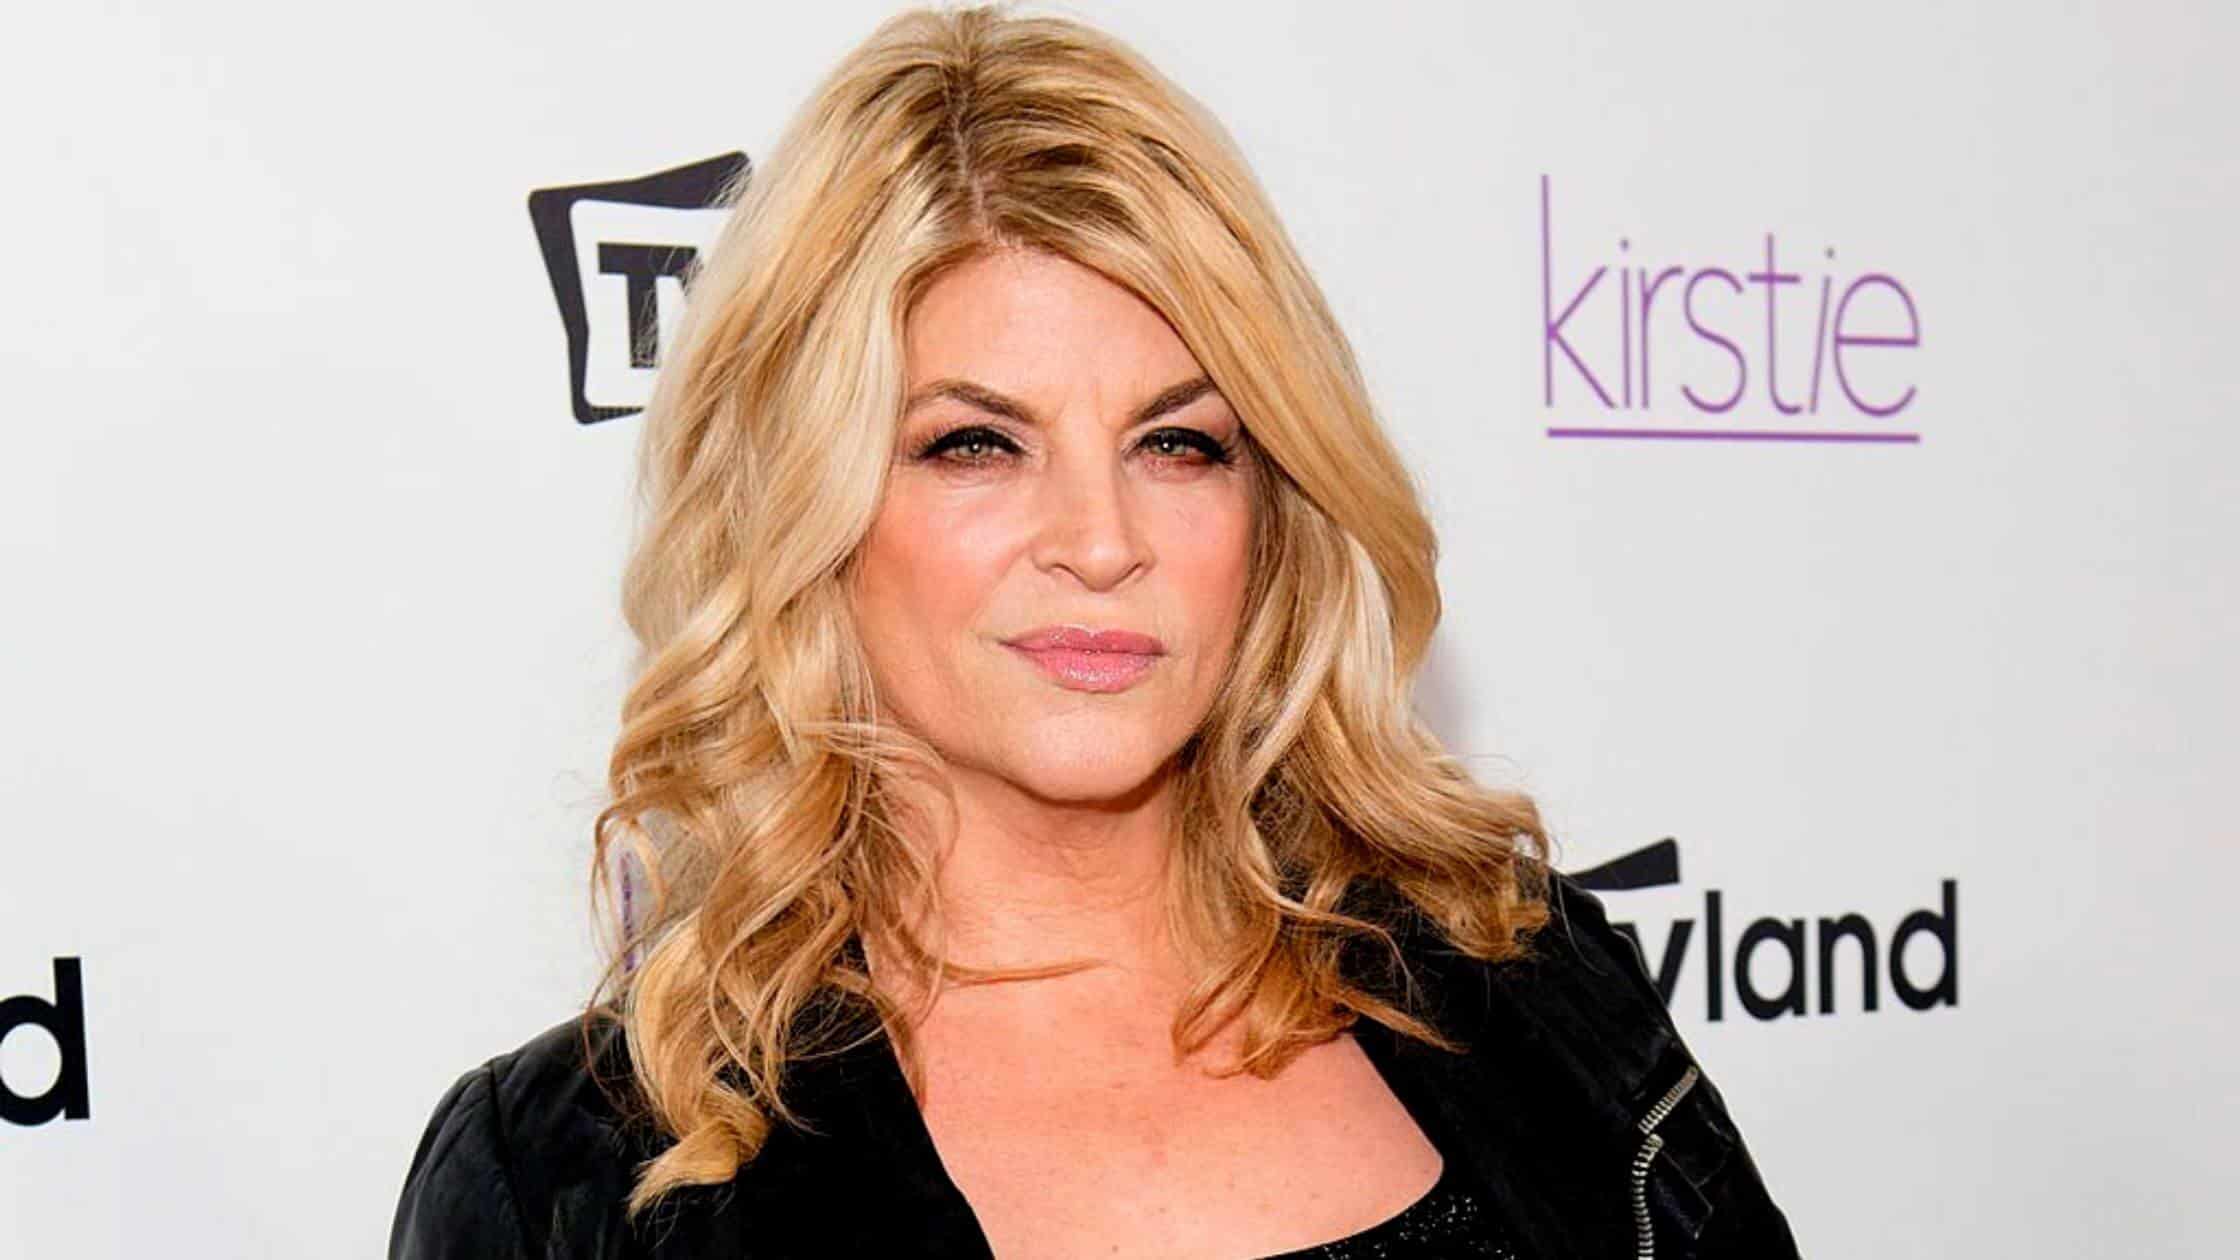 Kirstie Alley’s Last Pic And TV Appearance Before Her Death